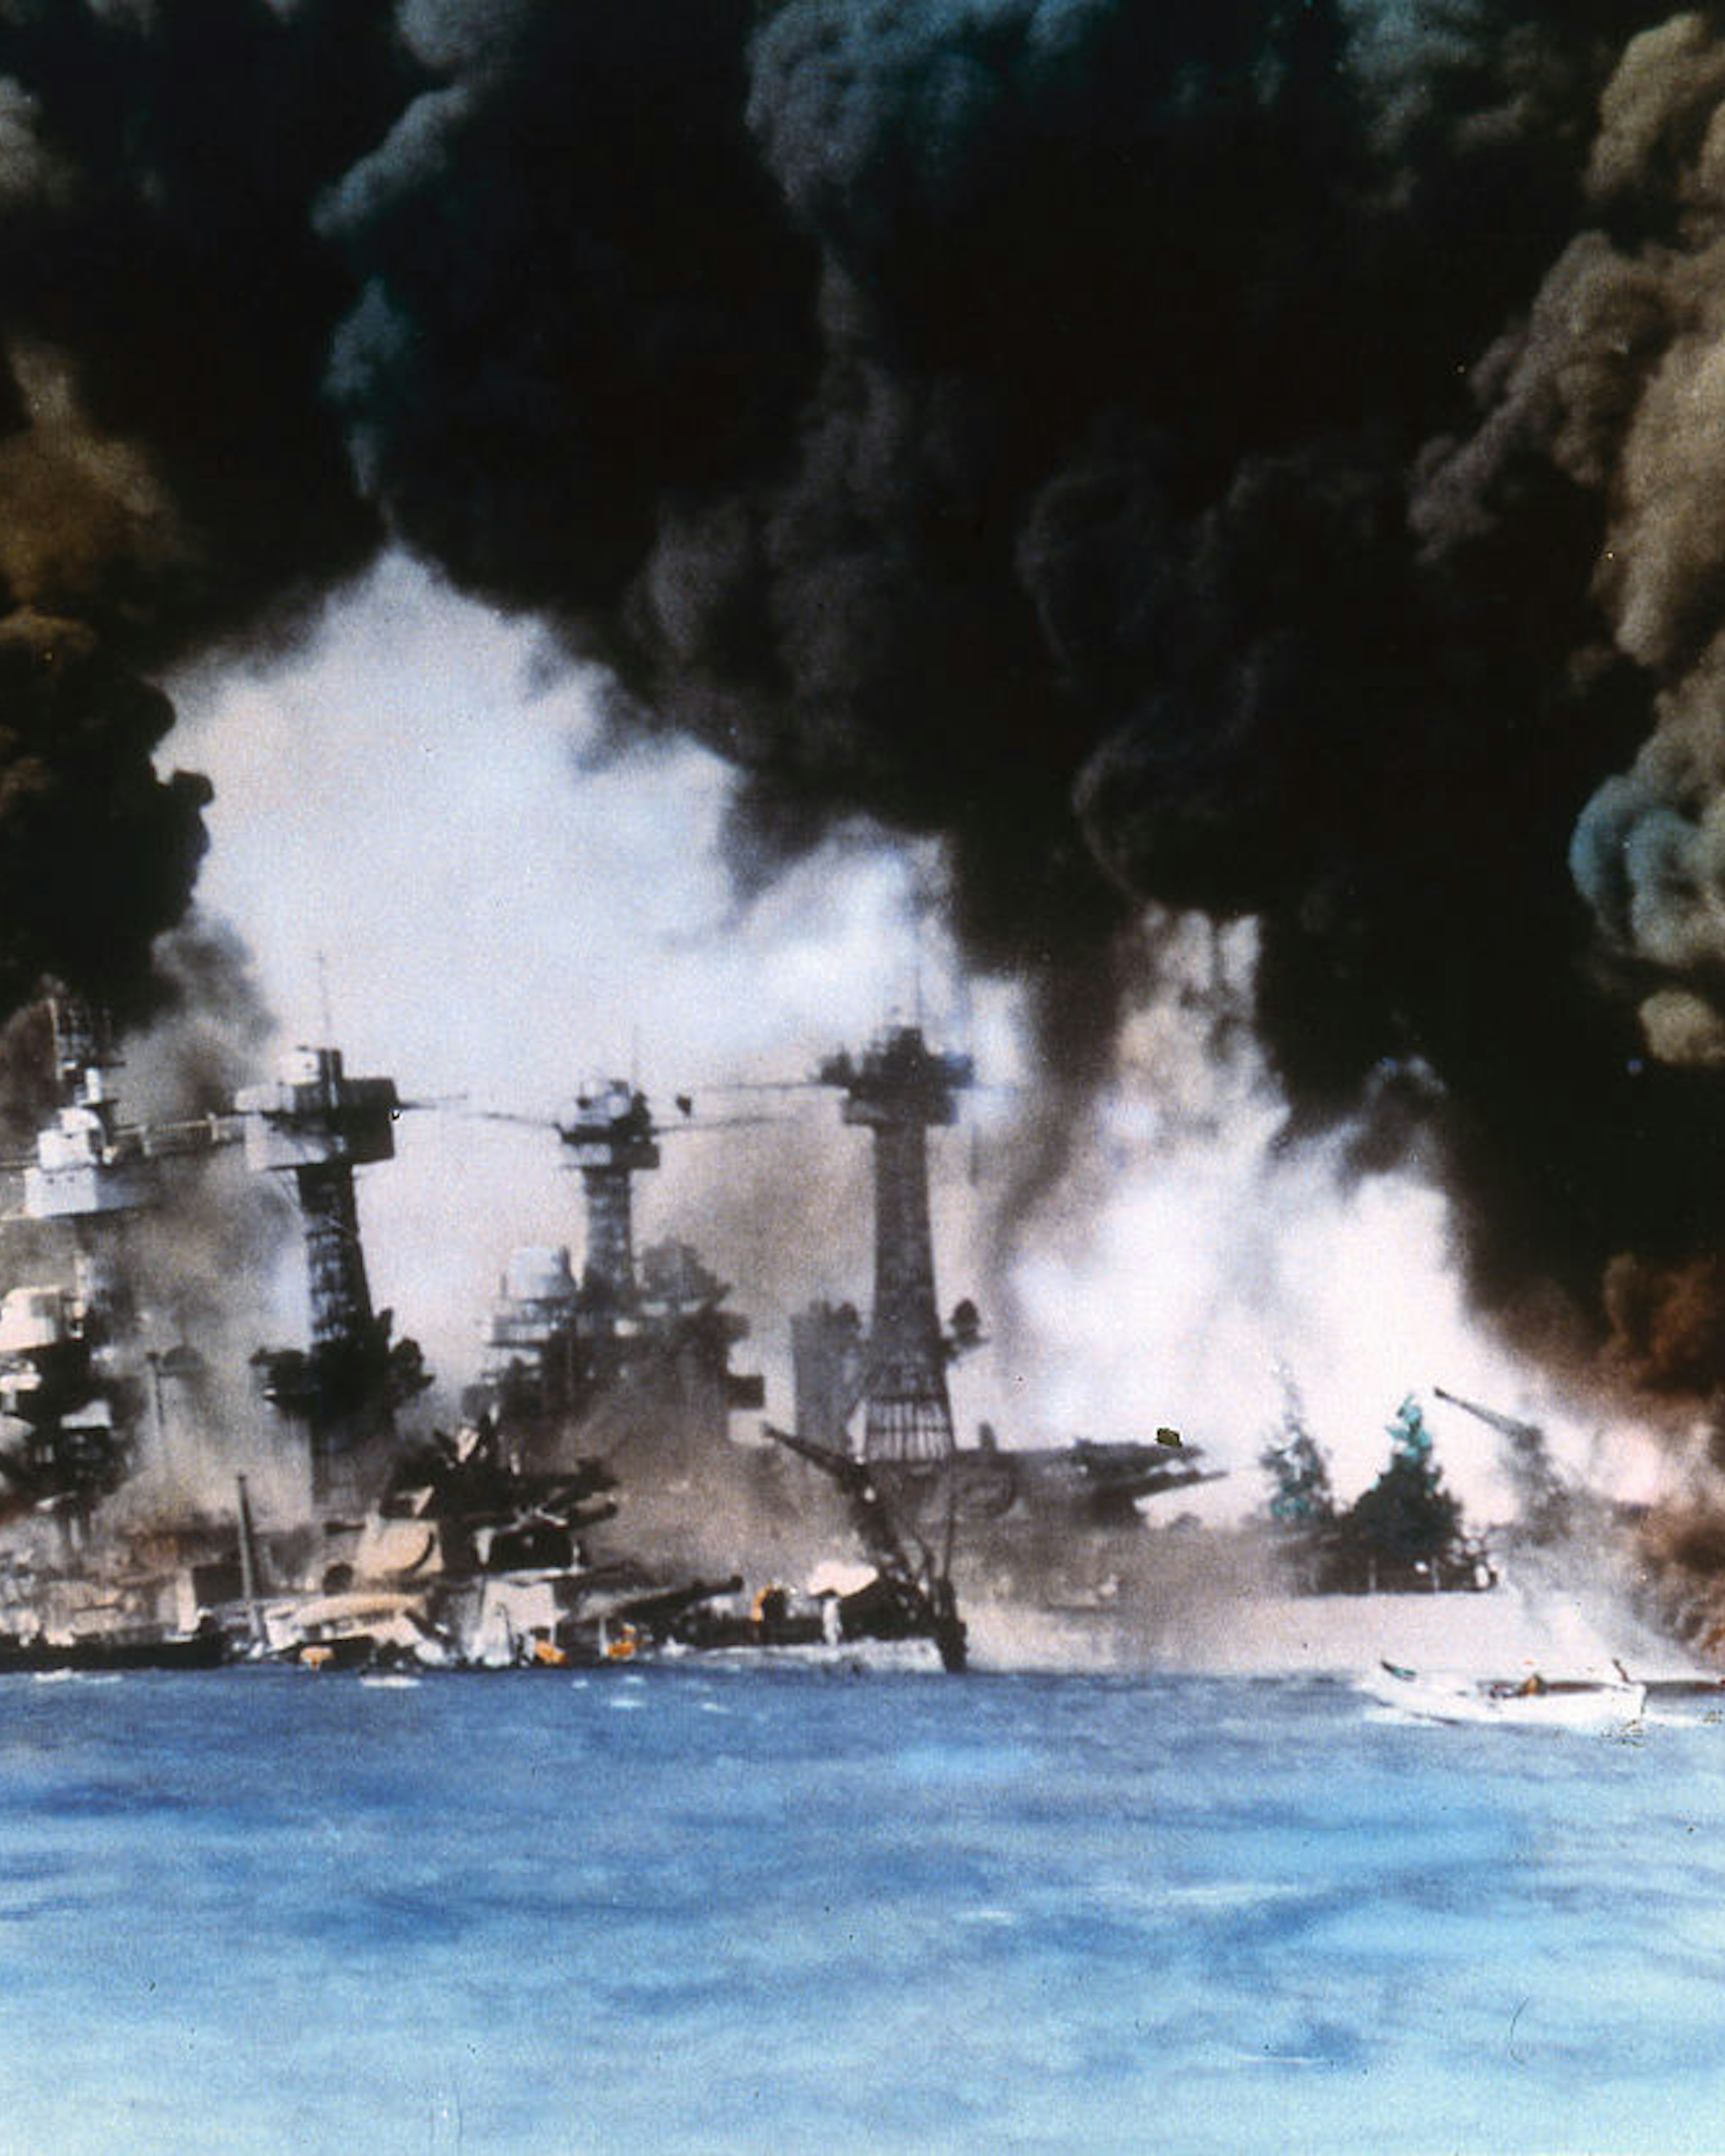 Thick smoke billows up from stricken American warships (from left, USS West Virginia and USS Tennessee) along battleship row during the Japanese attack on Pearl Harbor, Honolulu, Oahu, Hawaii, December 7, 1941. (Photo by US Navy/Interim Archives/Getty Images)